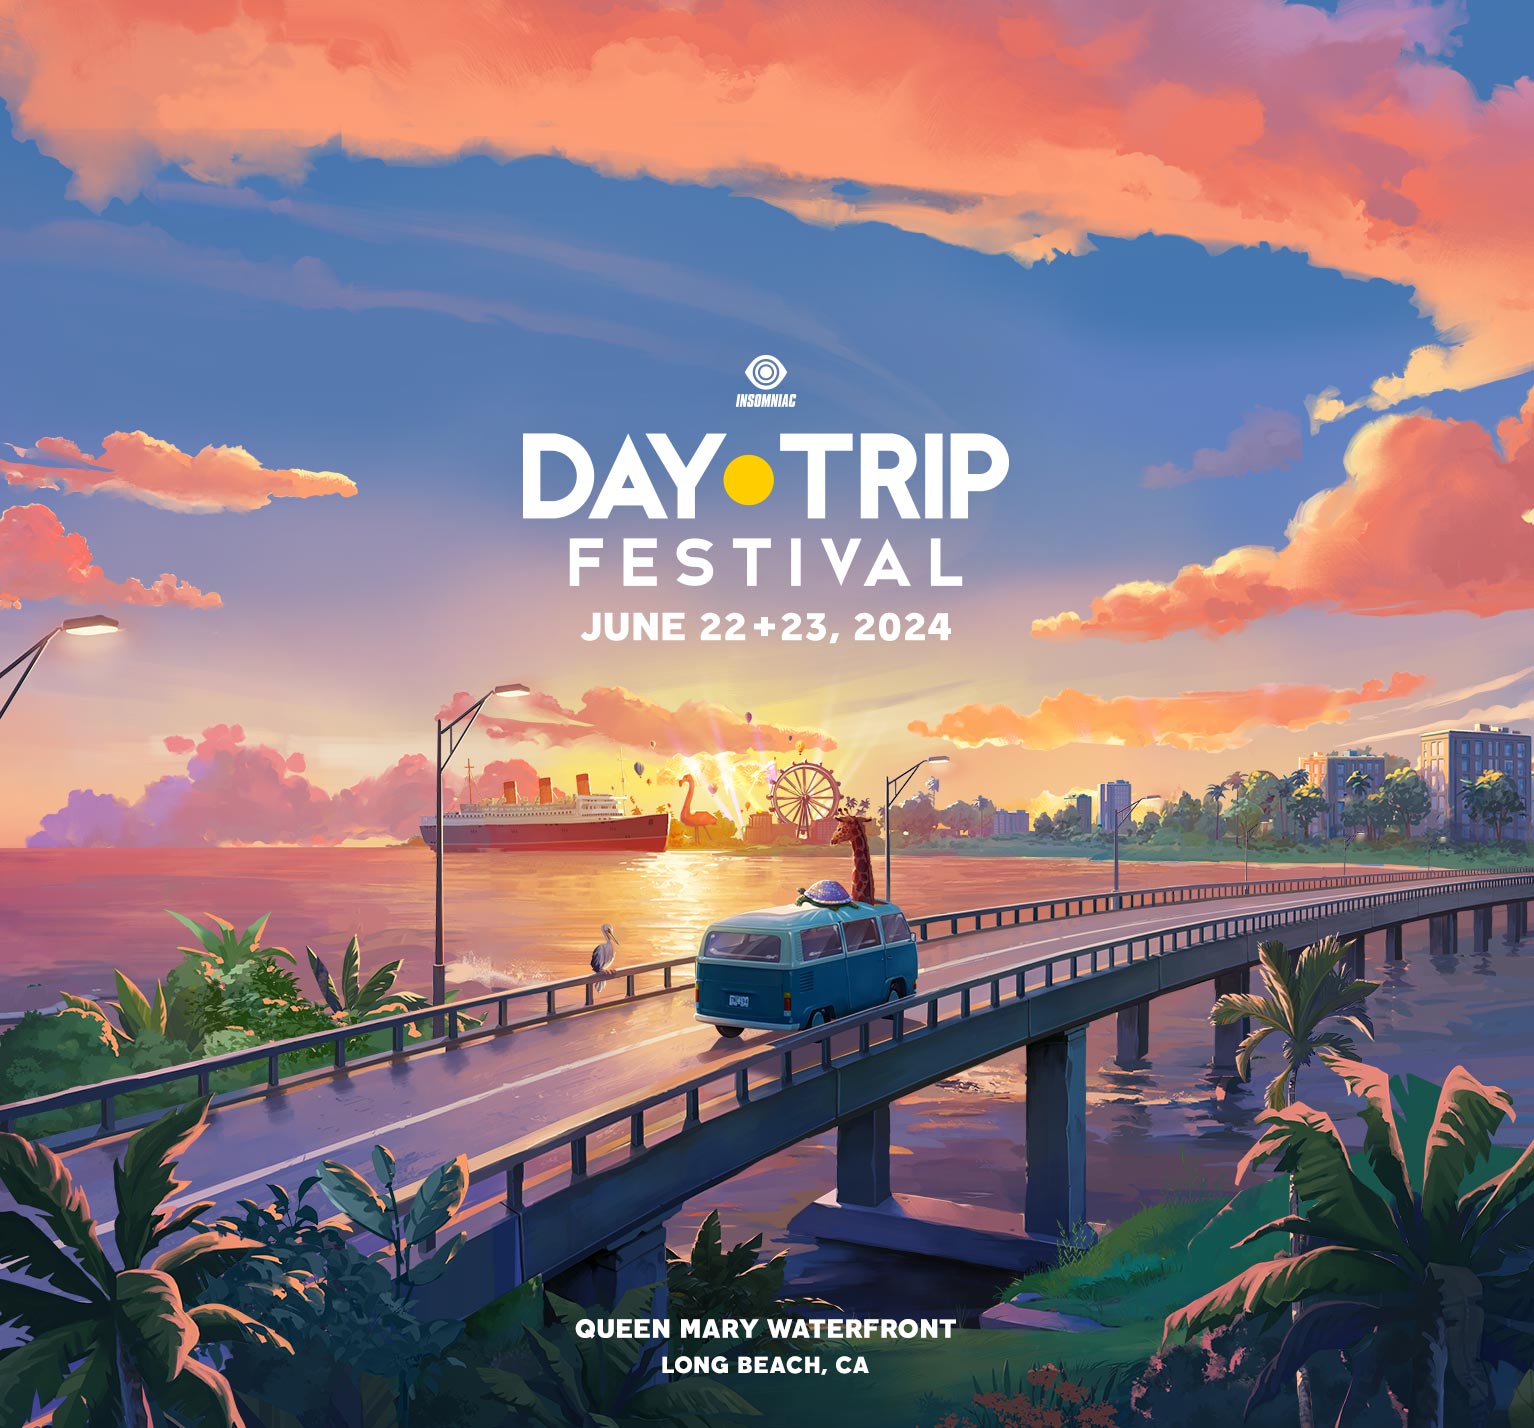 Day Trip Festival June 22+23, 2024 Queen Mary Waterfront